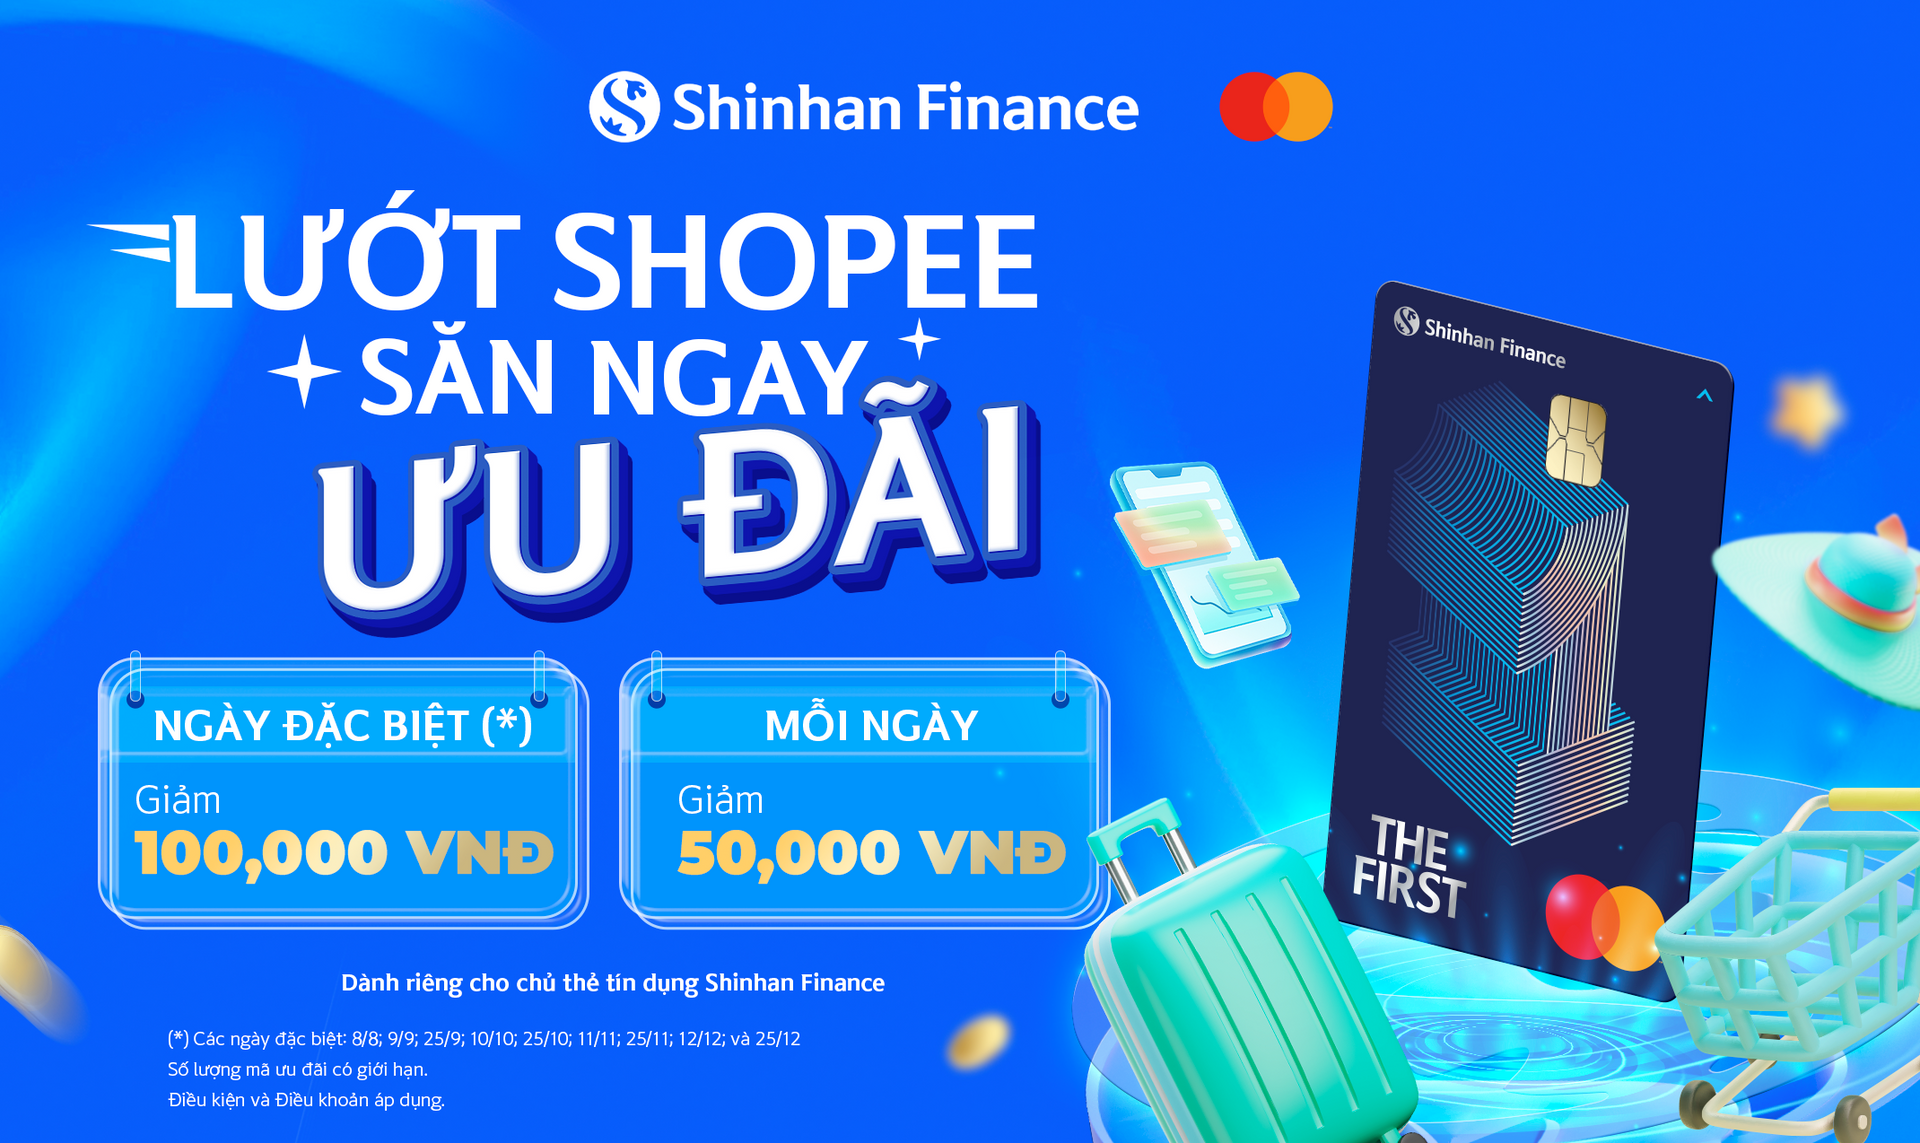 svfc-shopee-usage-campaign-banner.png